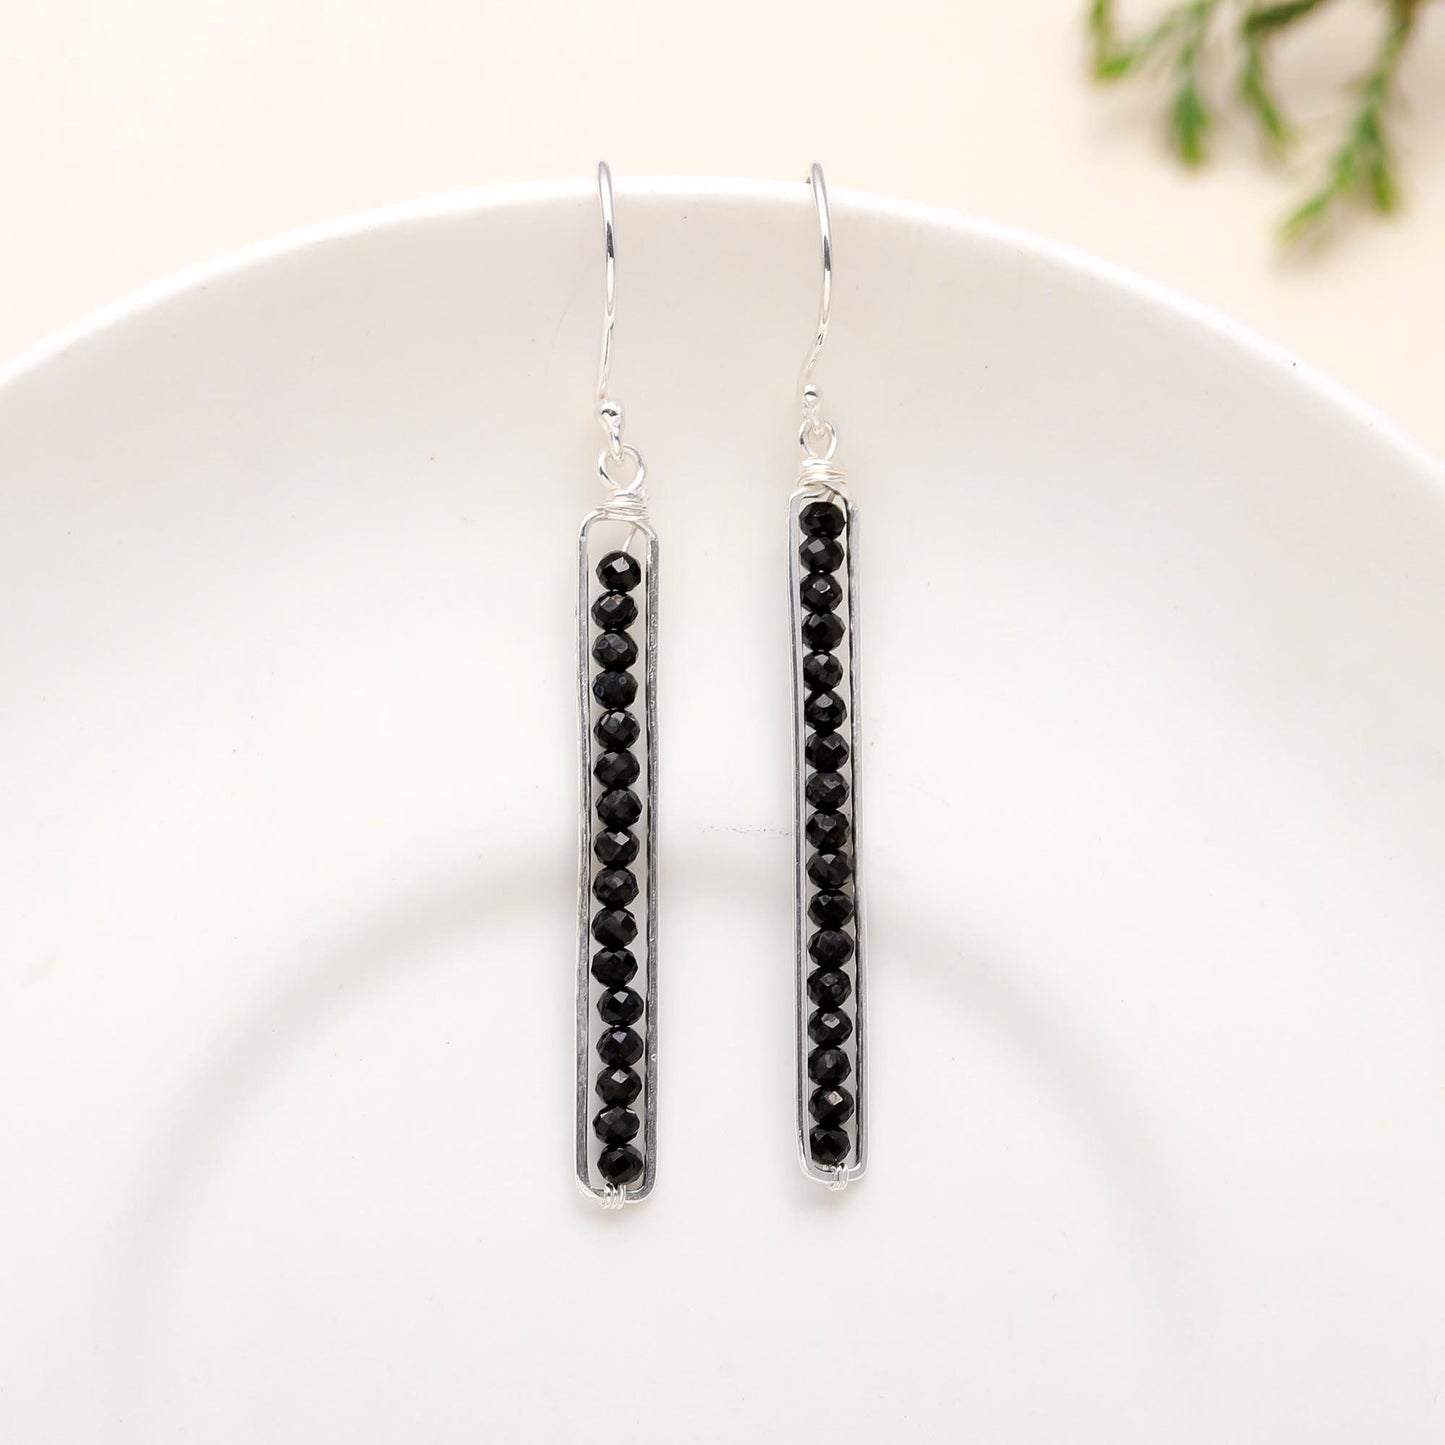 Solid 925 Sterling Silver Peapod Black Onyx Faceted Round Beads Earrings, Handmade, Gift for Her / Birthday / Anniversary,/ Dangle Earwire